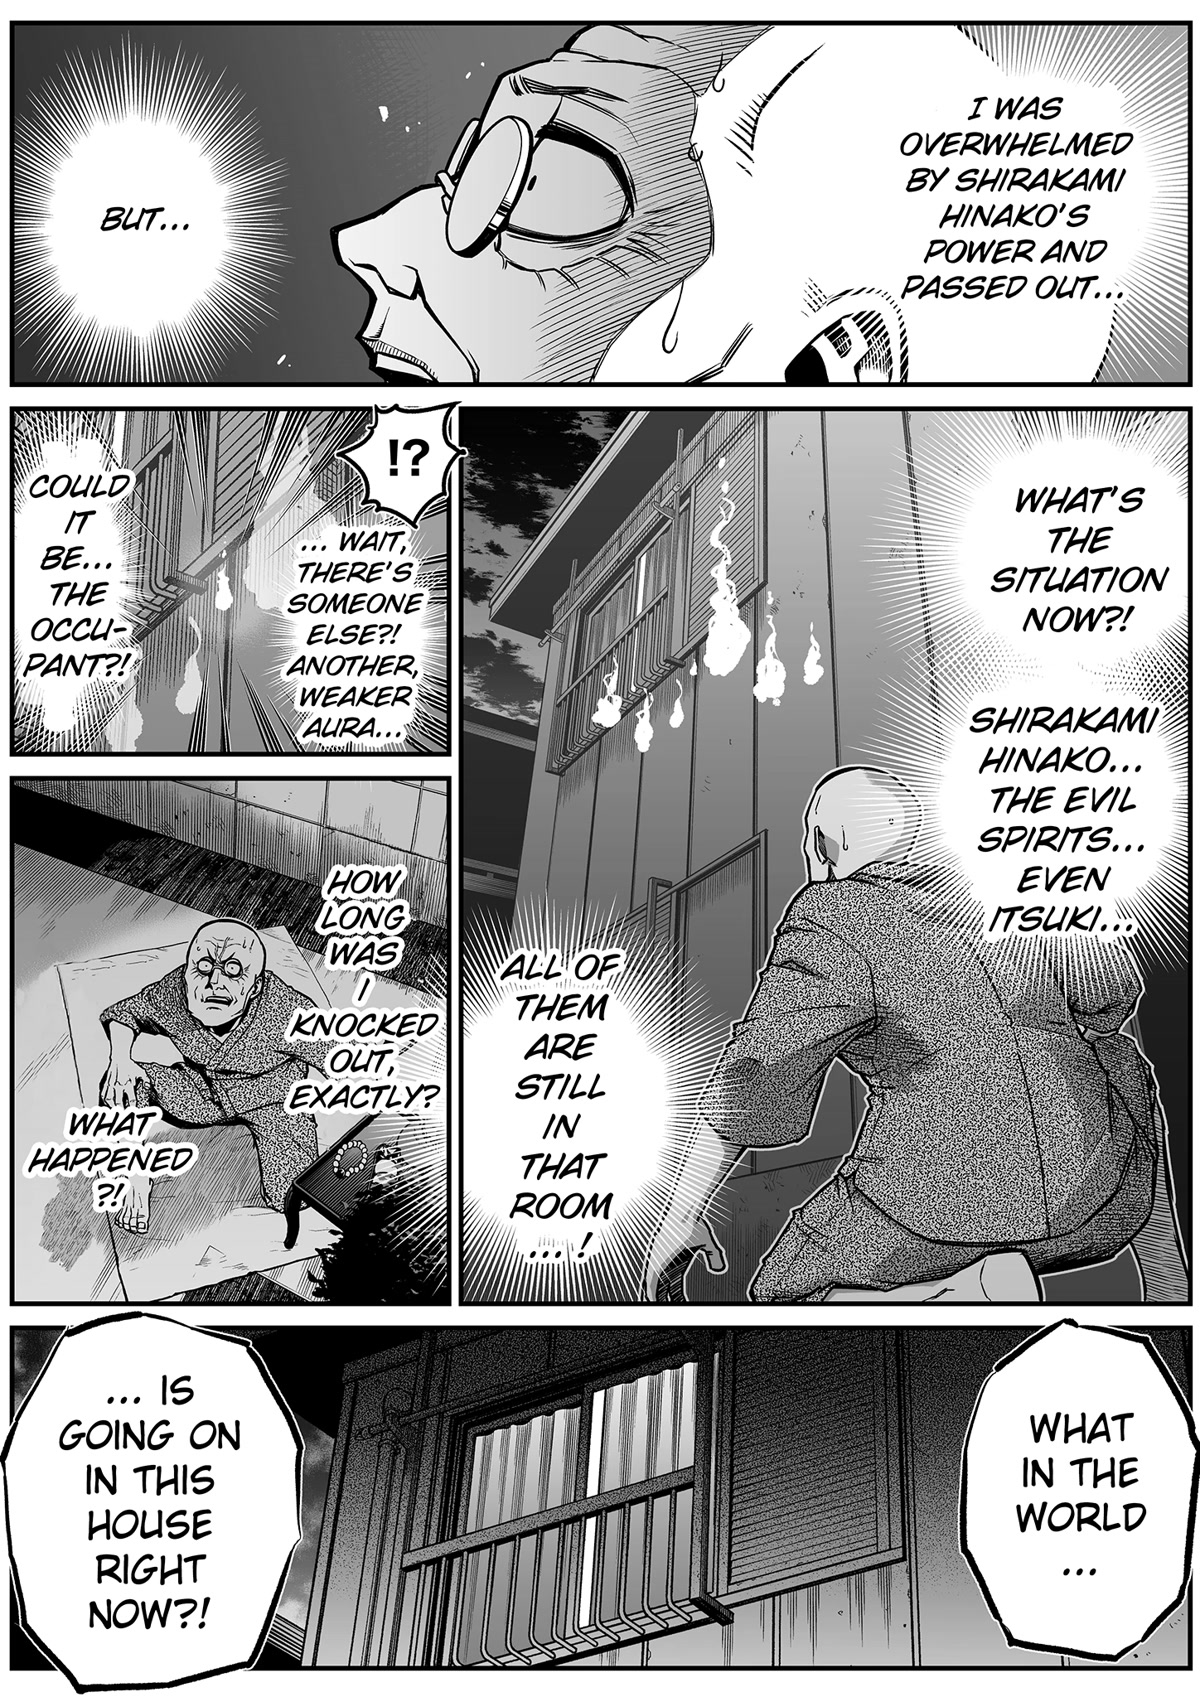 The Strongest Haunted House And The Guy With No Spiritual Sense - Page 1